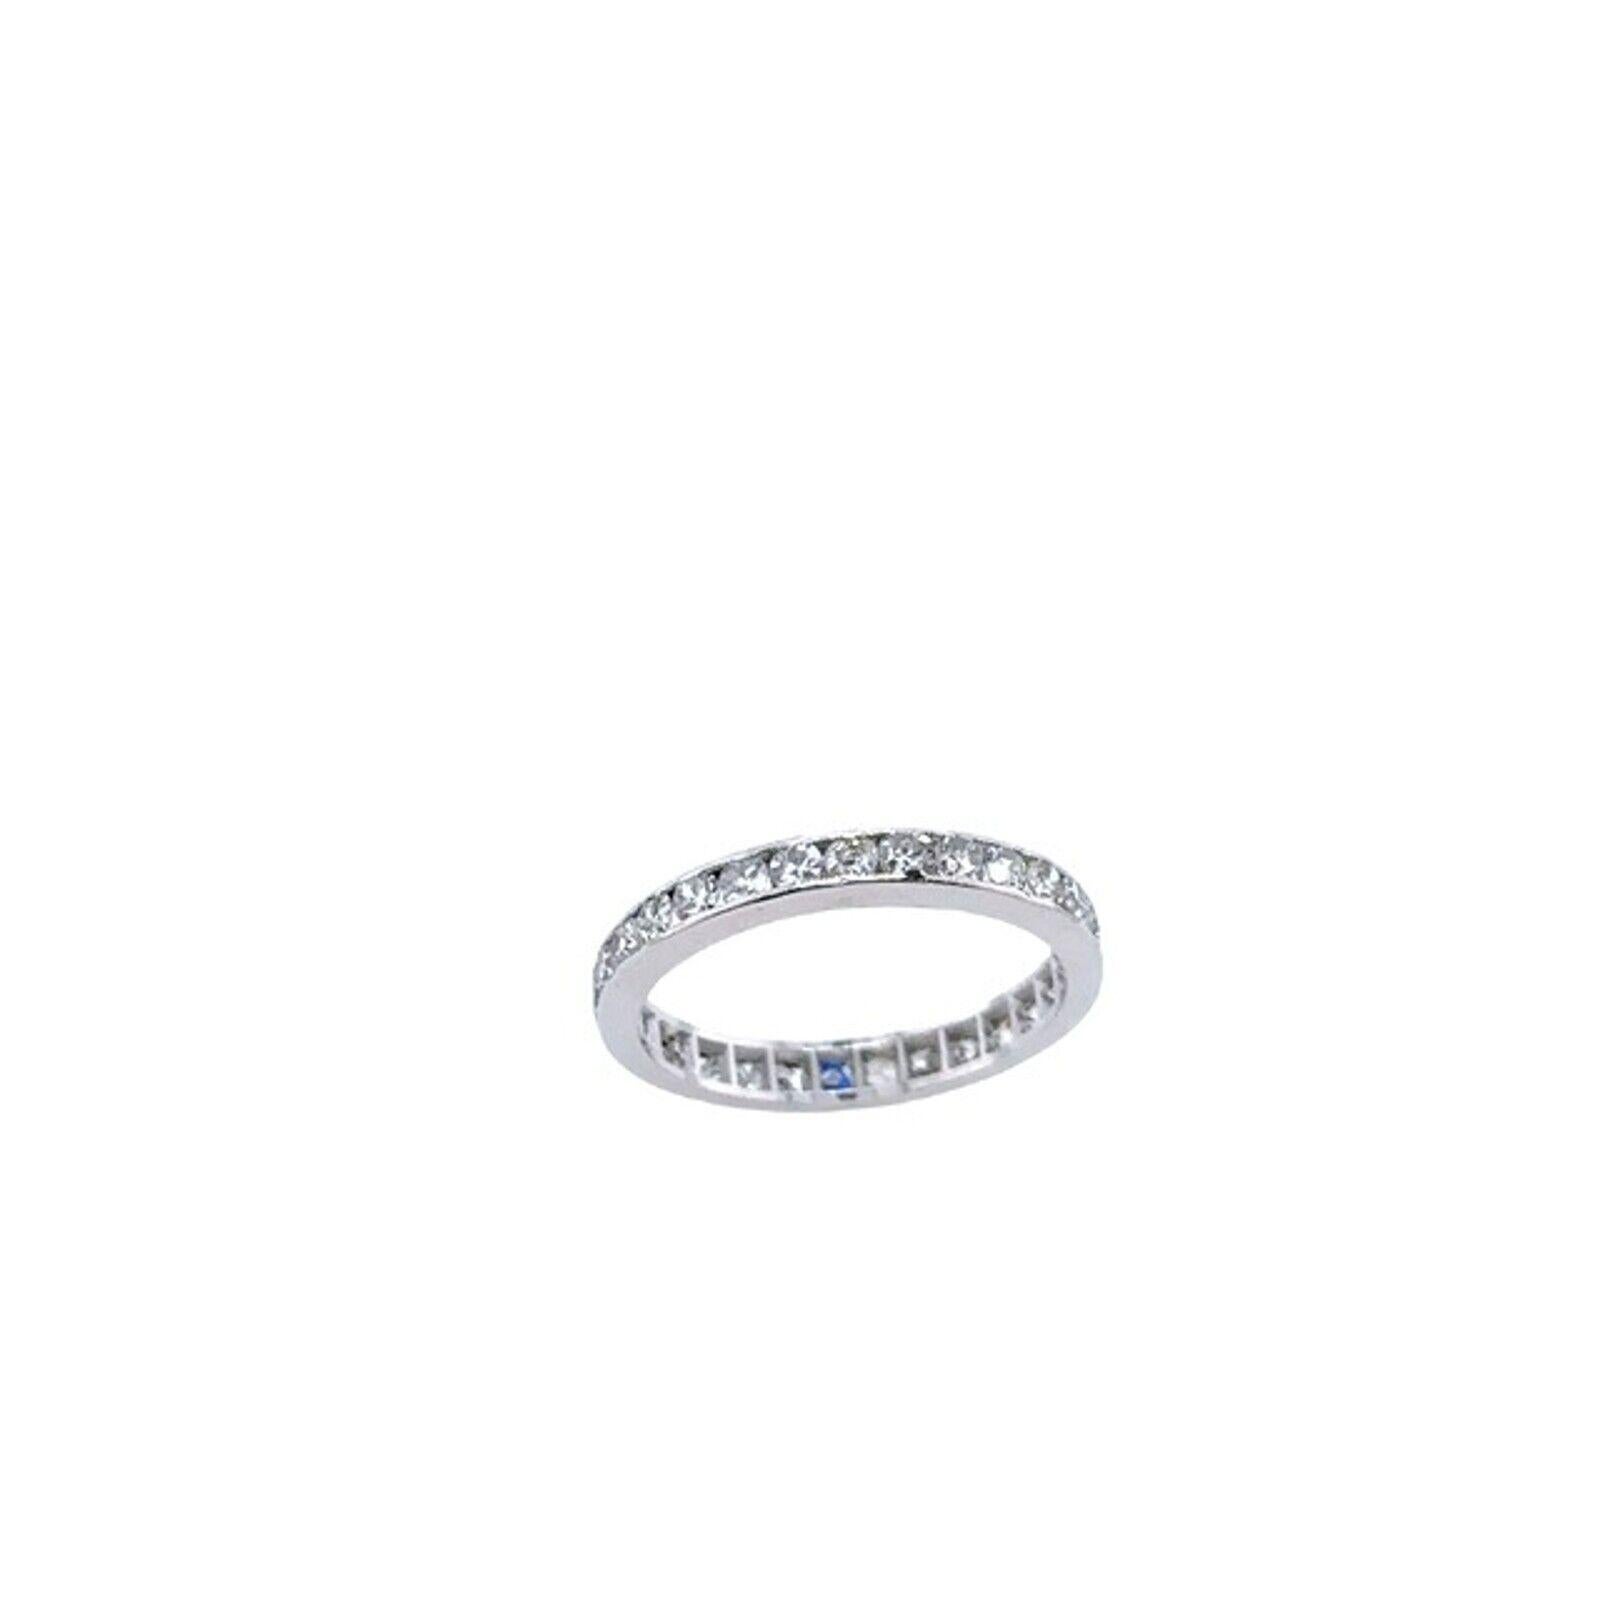 A simple and elegant design with a stunning 0.80ct of natural rose cut Diamonds, this Platinum ring is perfect for a wedding band or as an eternity ring. The total Diamond weight is 0.80ct with a clarity of SI and a colour of G-H.

Additional